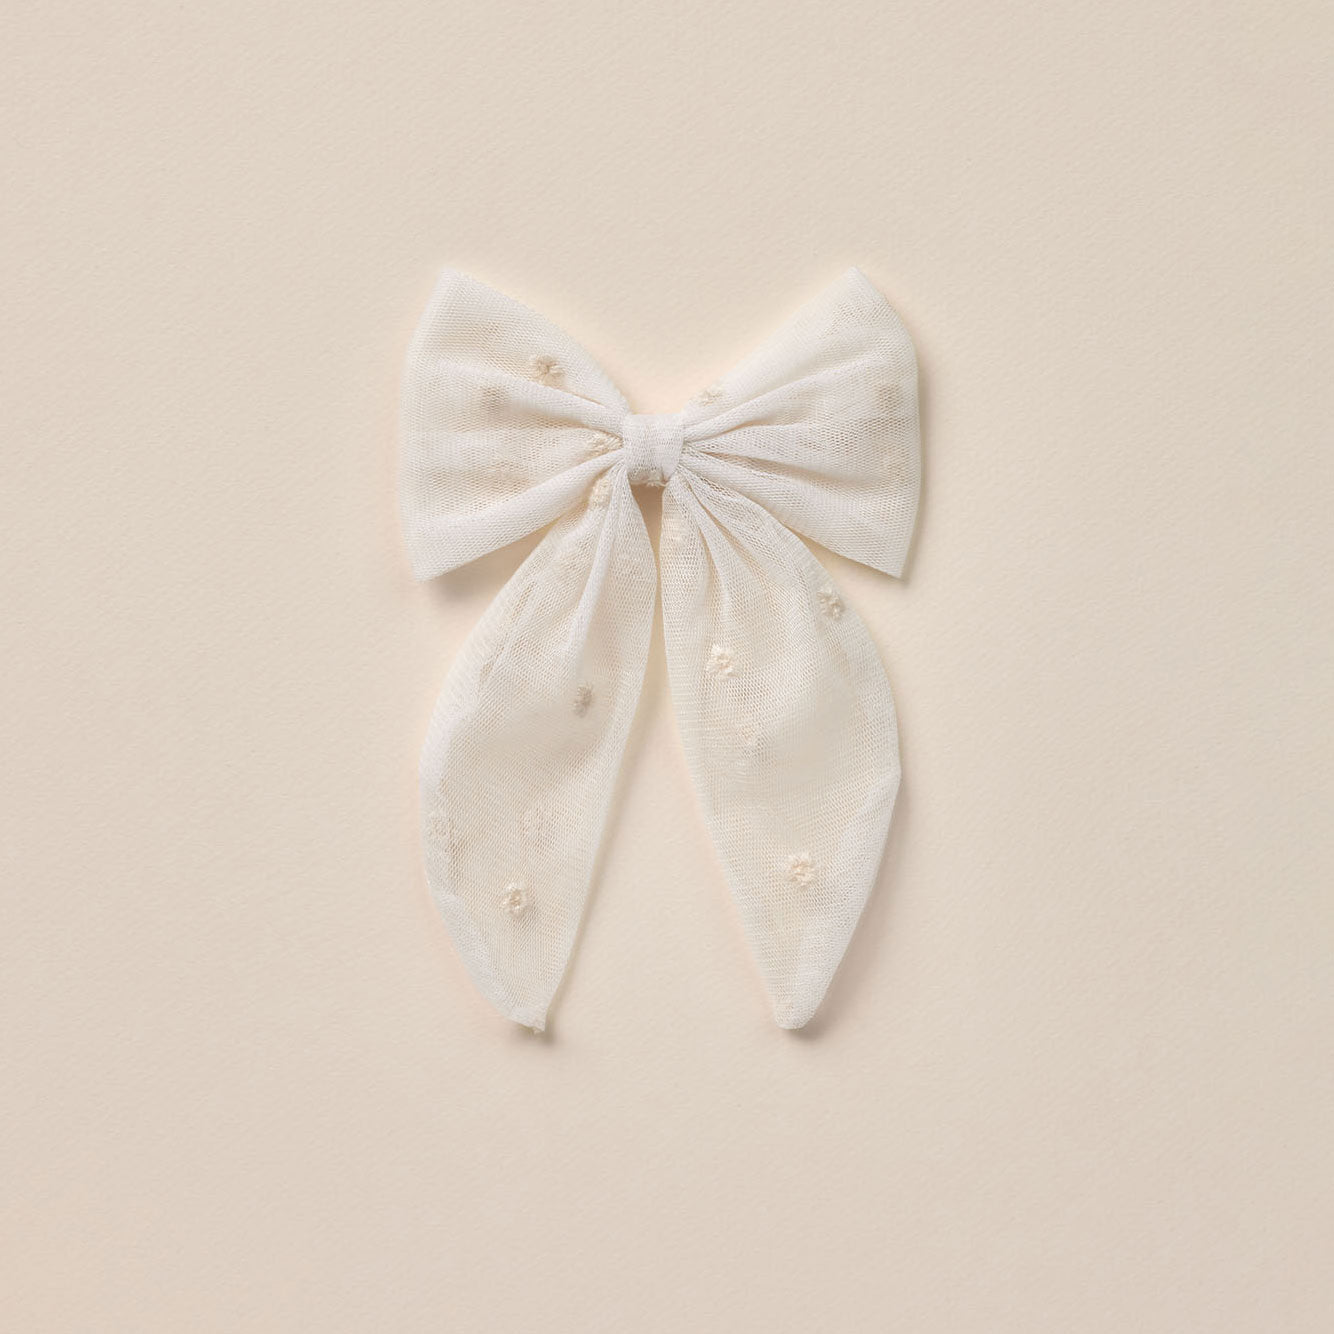 Noralee Oversized Bow - Ivory Floral Tulle